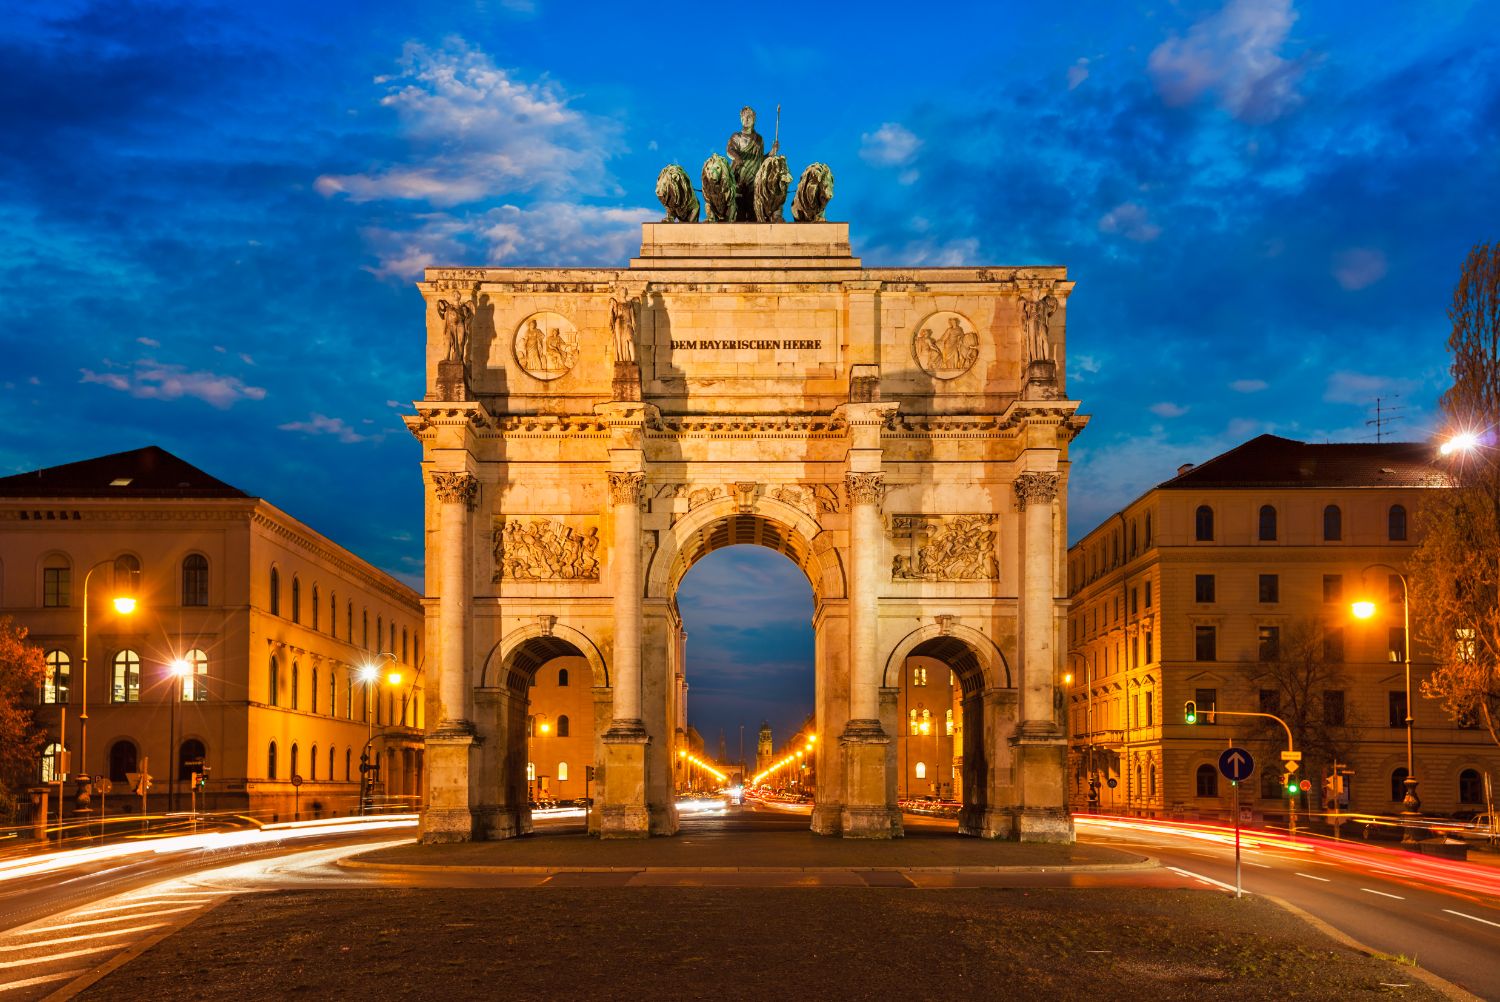 The victory Gate in Münich, Germany